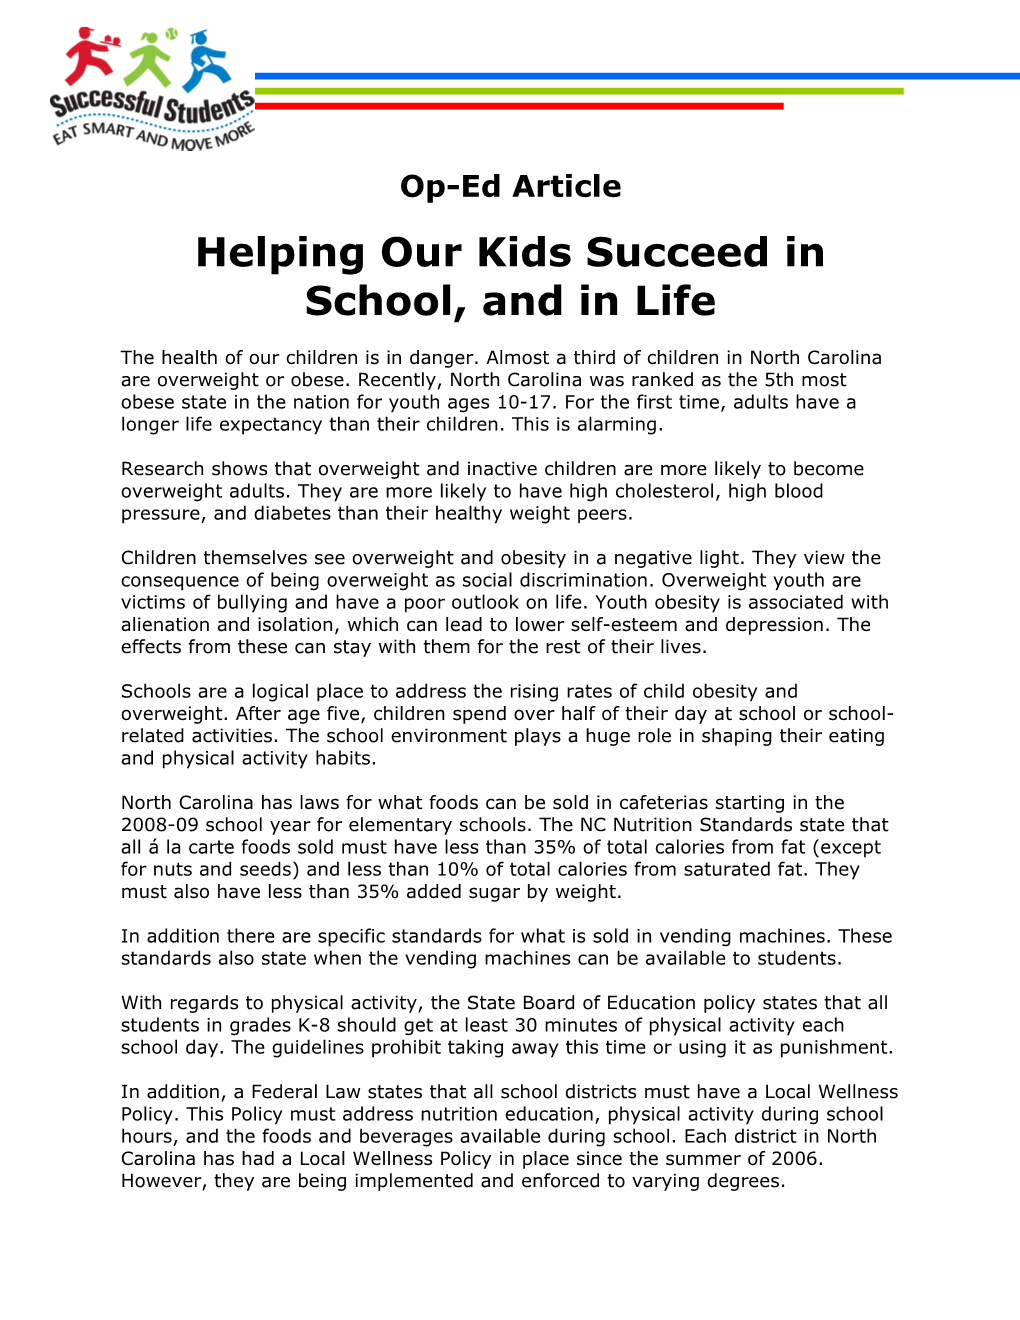 Helping Our Kids Succeed in School, and in Life